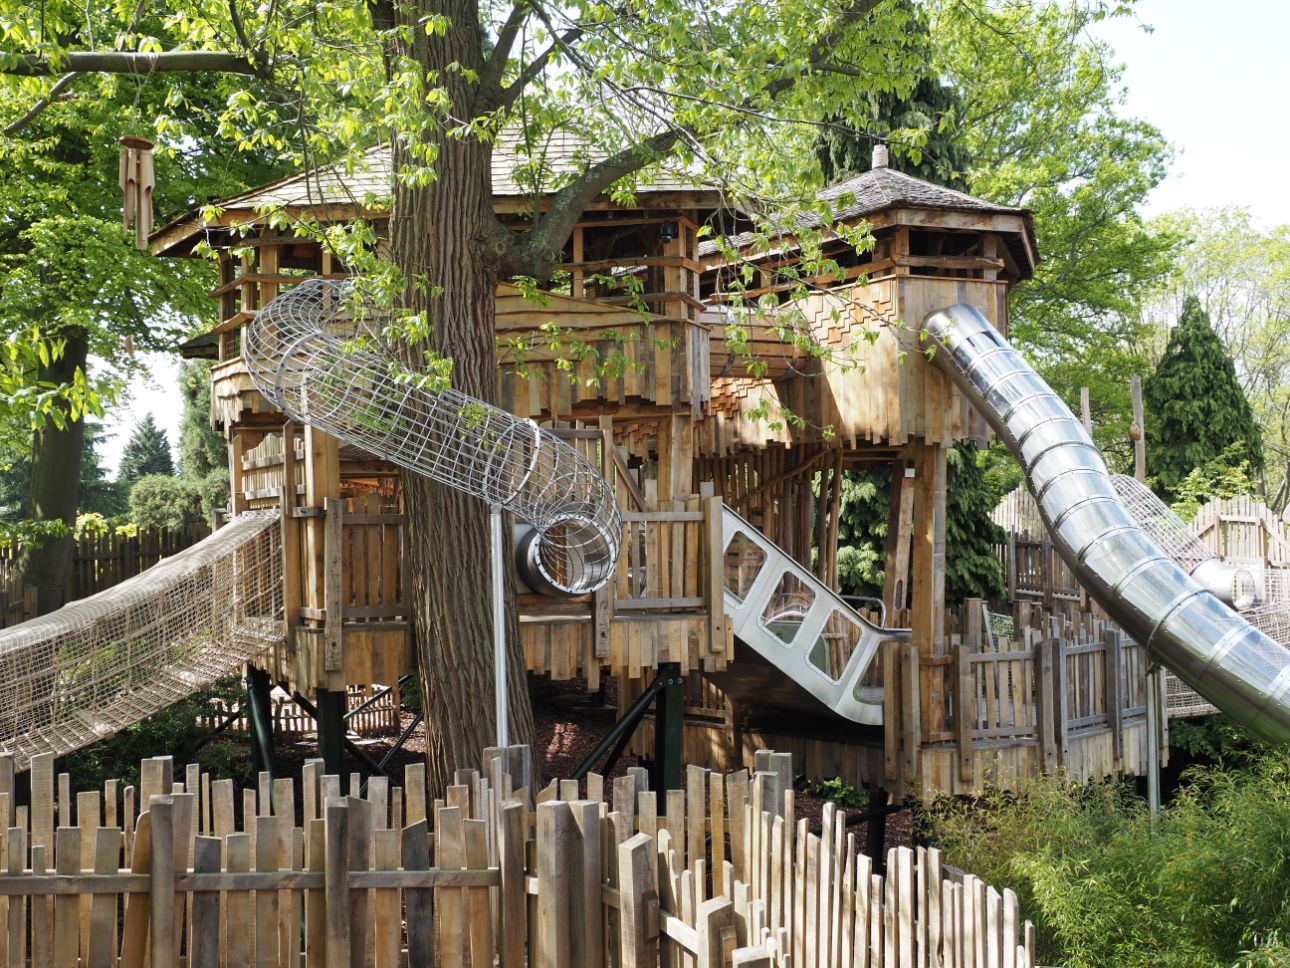 Tree houses with slides to the ground. Fencing with green foliage and a purple Acer.